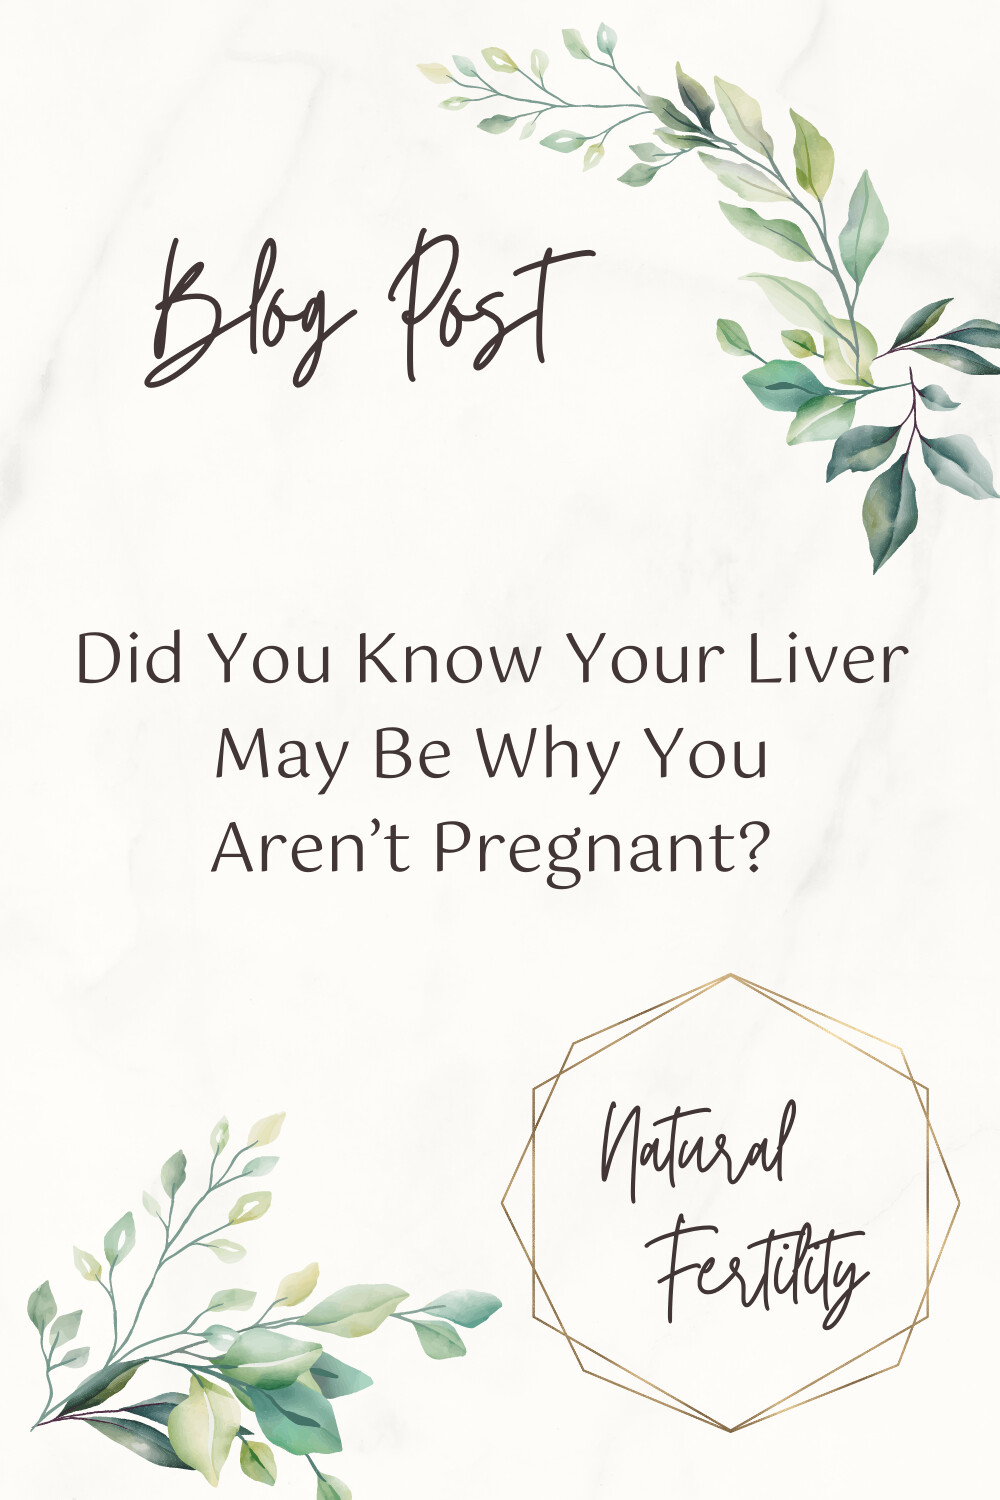 Did You Know Your Liver May Be Why You Aren’t Pregnant?